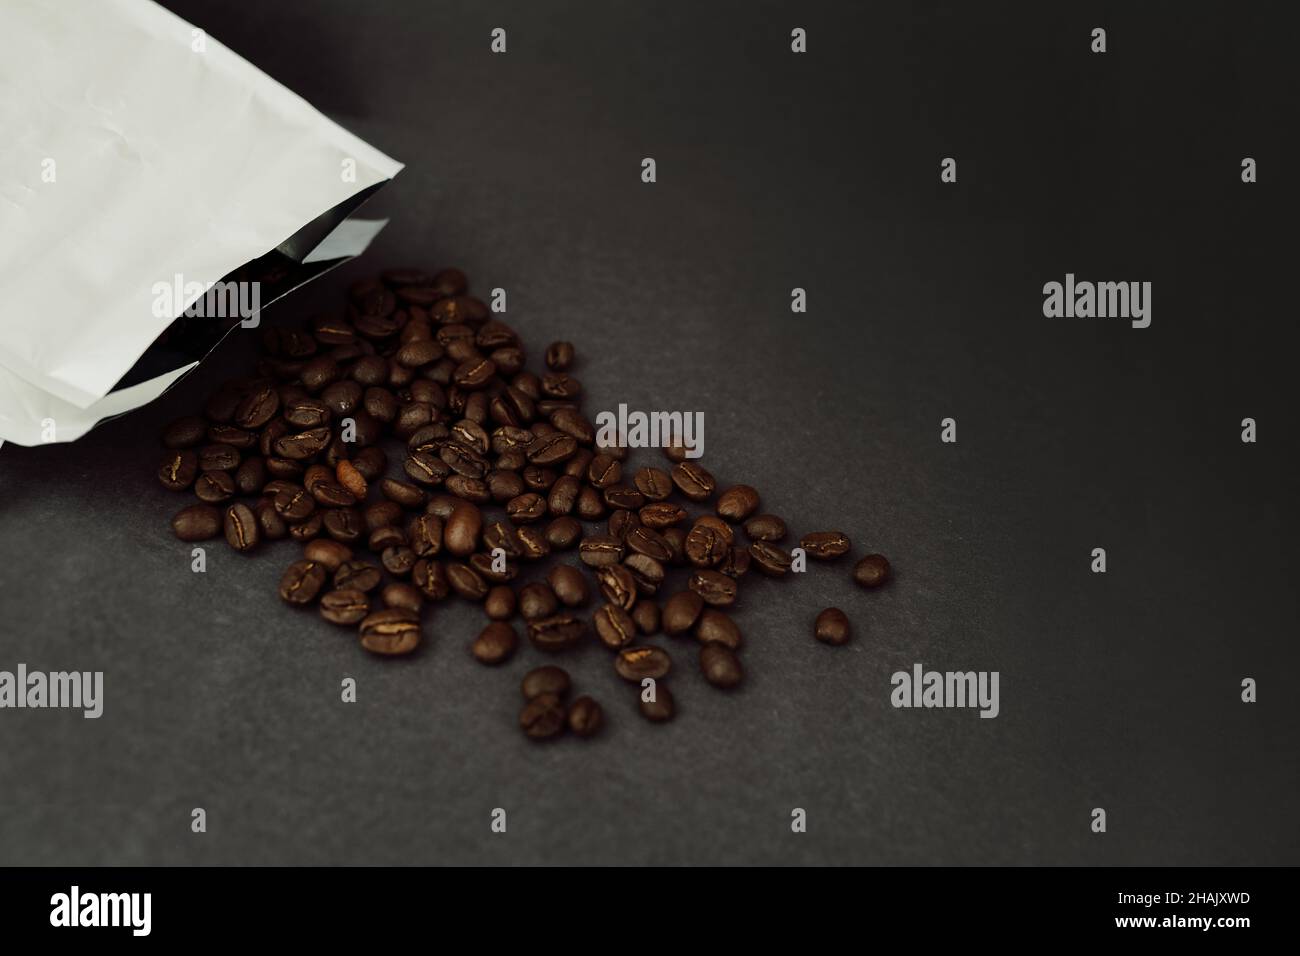 Coffee Beans Spilling out of White Foil Bag on Dark Background with Copy Space Stock Photo